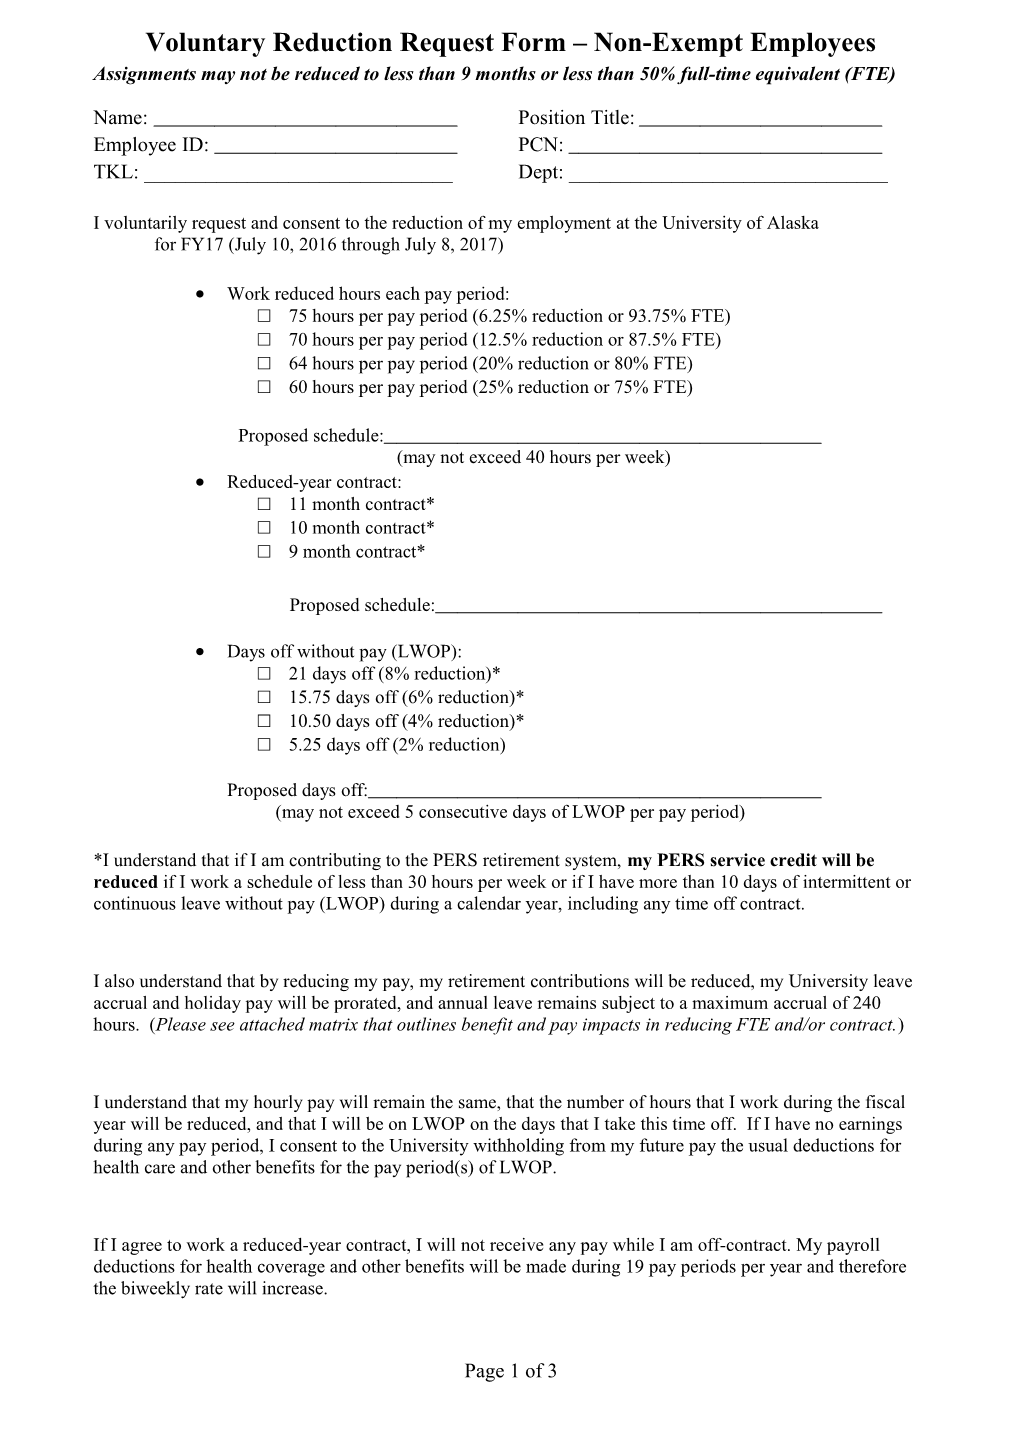 Voluntary Reduction Request Form Non-Exempt Employees